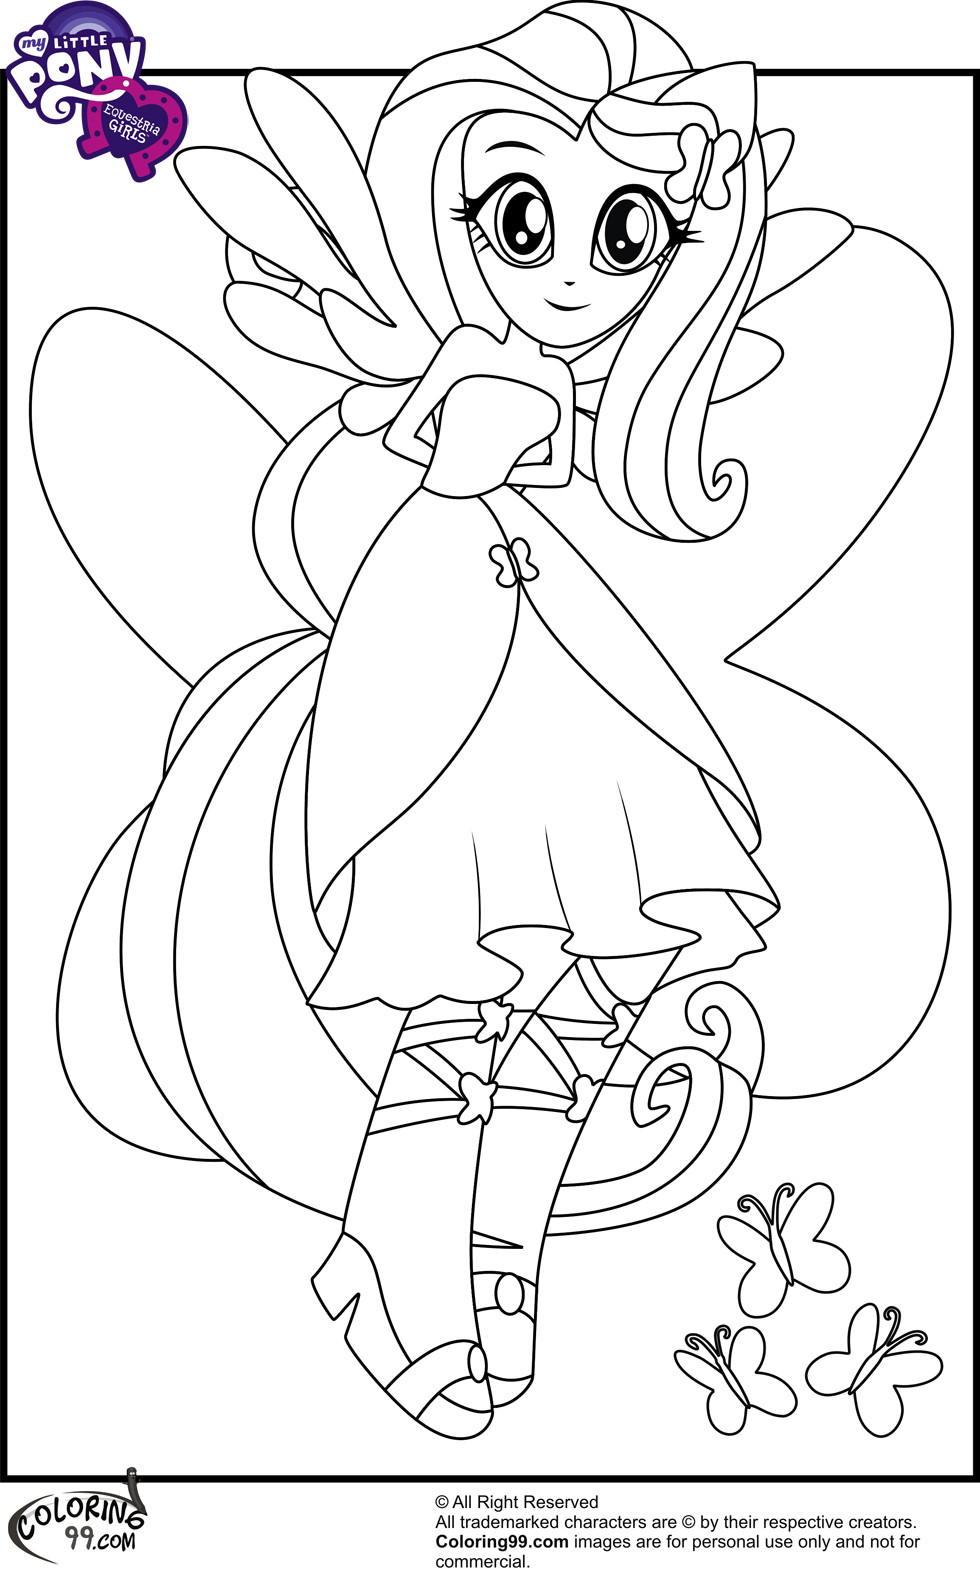 Equestria Girls Ausmalbilder
 My Little Pony Equestria Girls Coloring Pages